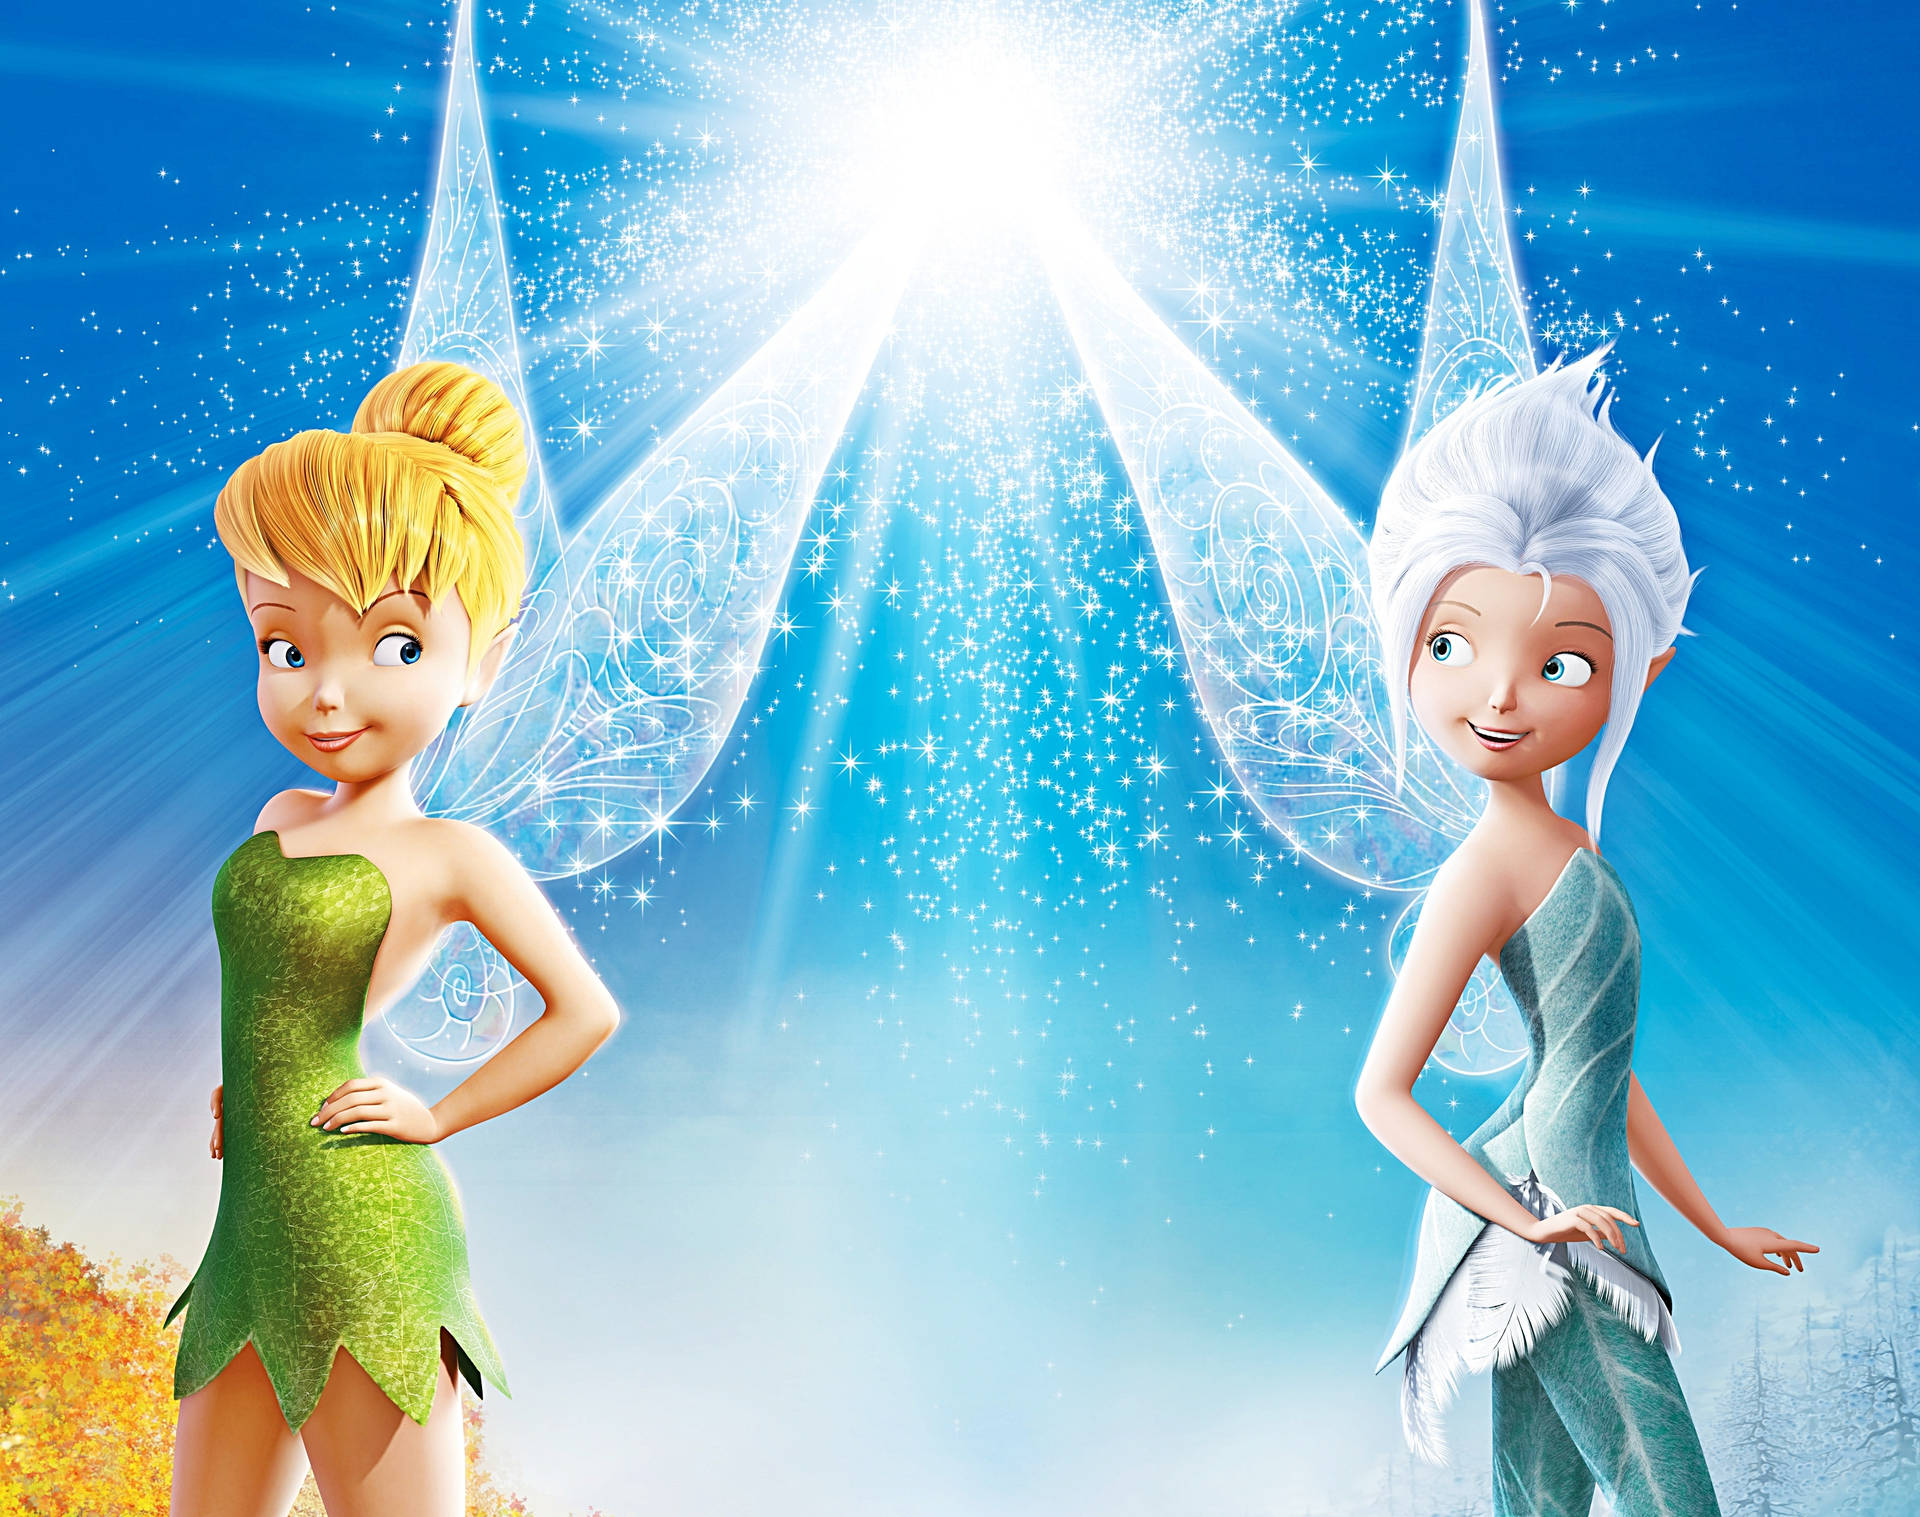 Tinker Bell And Periwinkle Wallpaper